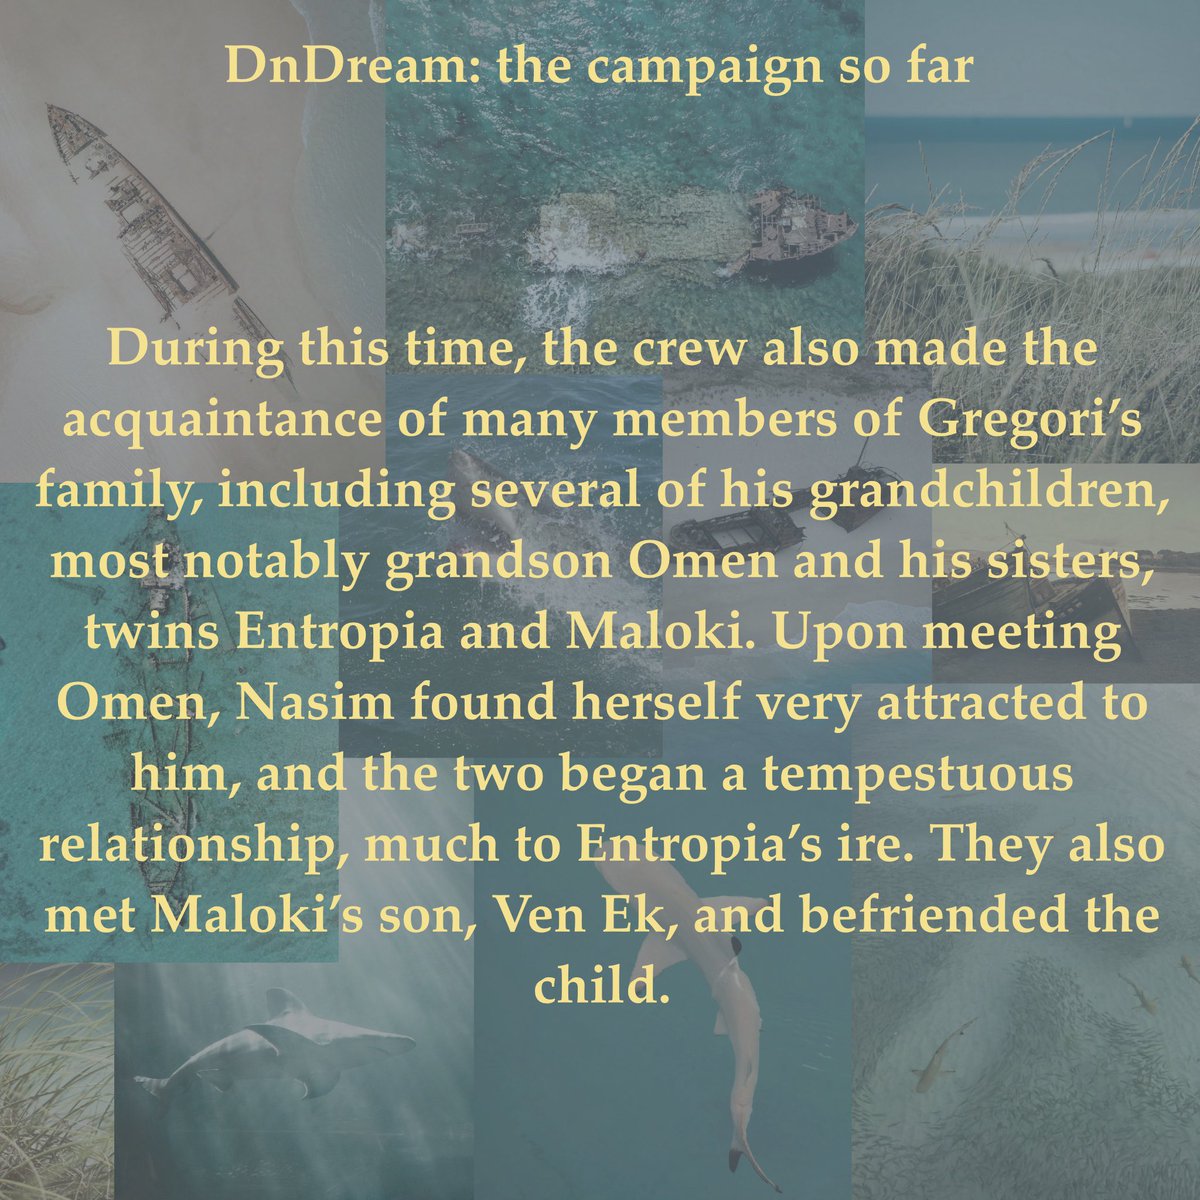 Continuing our catchup, this time around we meet Kriv and Entropia for the first time! #dndream #campaignrecap #dndcampaign